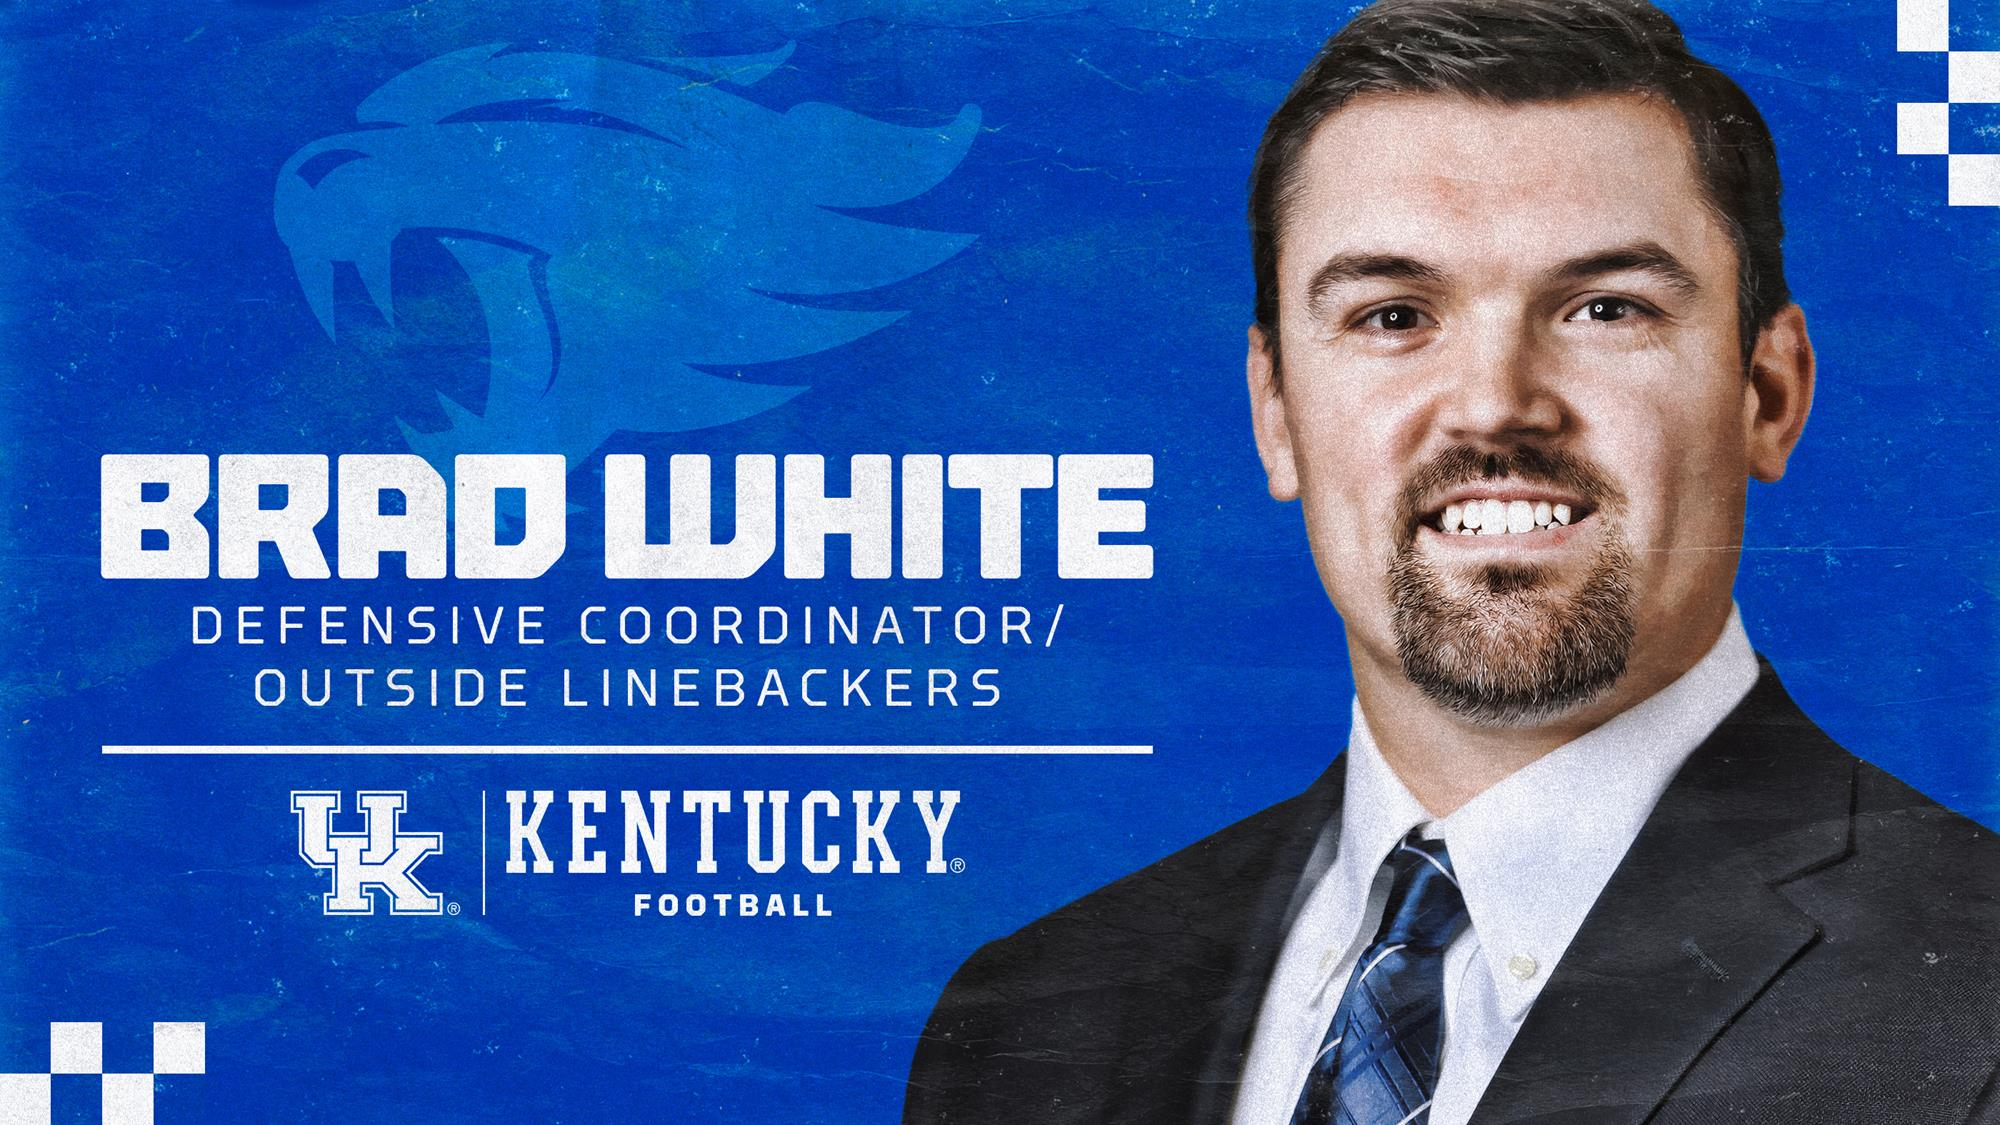 White Elevated to Defensive Coordinator